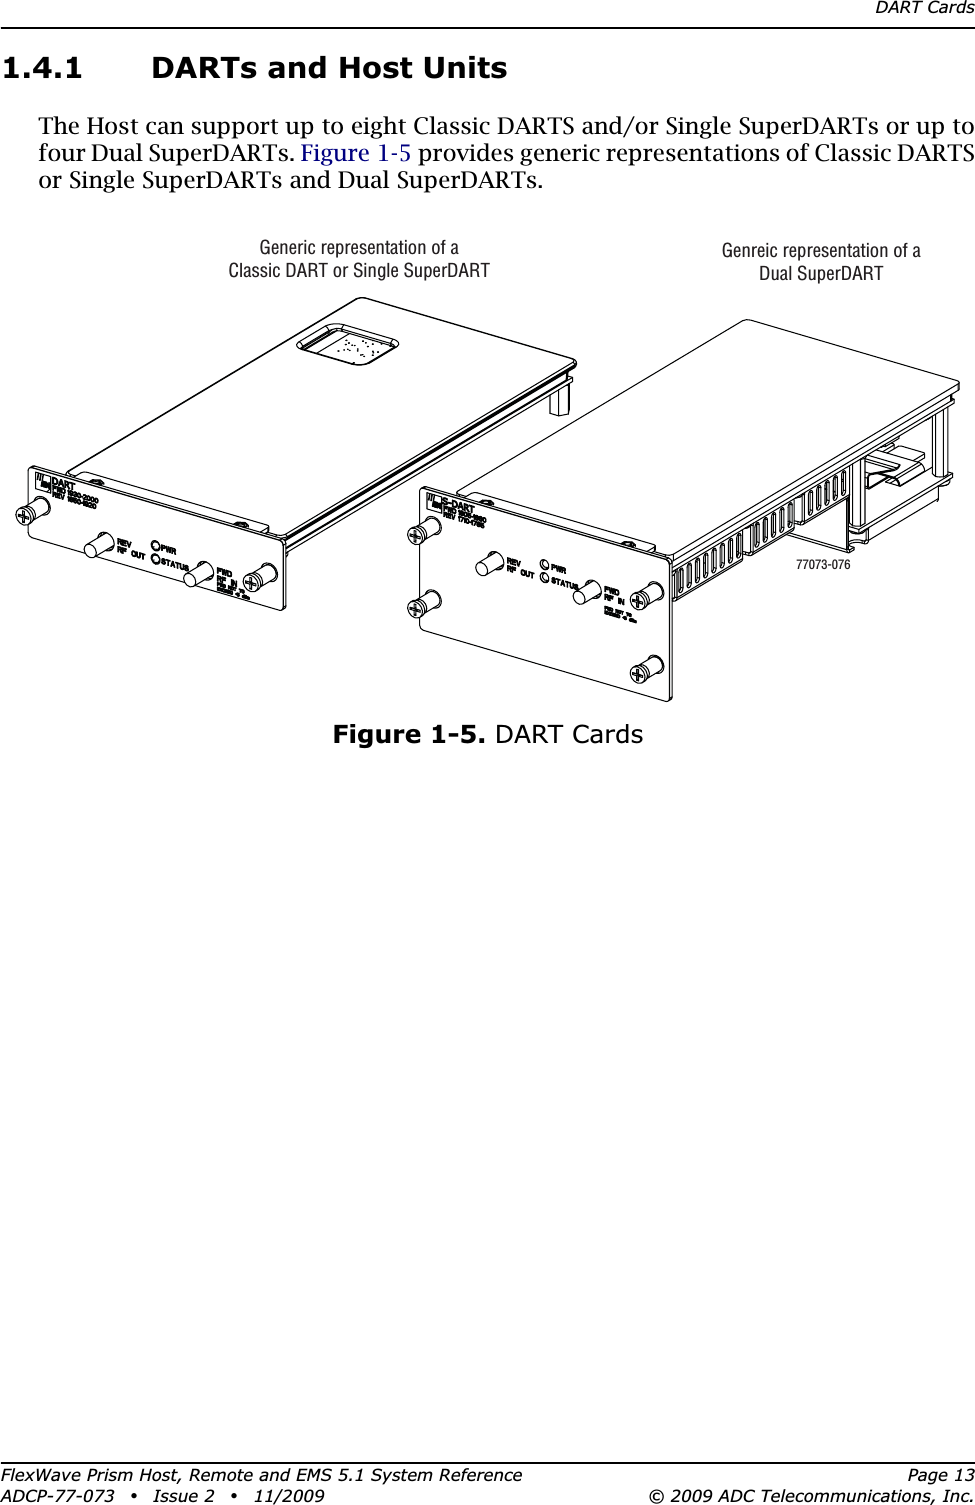 DART CardsFlexWave Prism Host, Remote and EMS 5.1 System Reference Page 13ADCP-77-073 • Issue 2 • 11/2009 © 2009 ADC Telecommunications, Inc.1.4.1 DARTs and Host UnitsThe Host can support up to eight Classic DARTS and/or Single SuperDARTs or up to four Dual SuperDARTs. Figure 1-5 provides generic representations of Classic DARTS or Single SuperDARTs and Dual SuperDARTs.Figure 1-5. DART CardsGeneric representation of aClassic DART or Single SuperDARTGenreic representation of aDual SuperDART77073-076